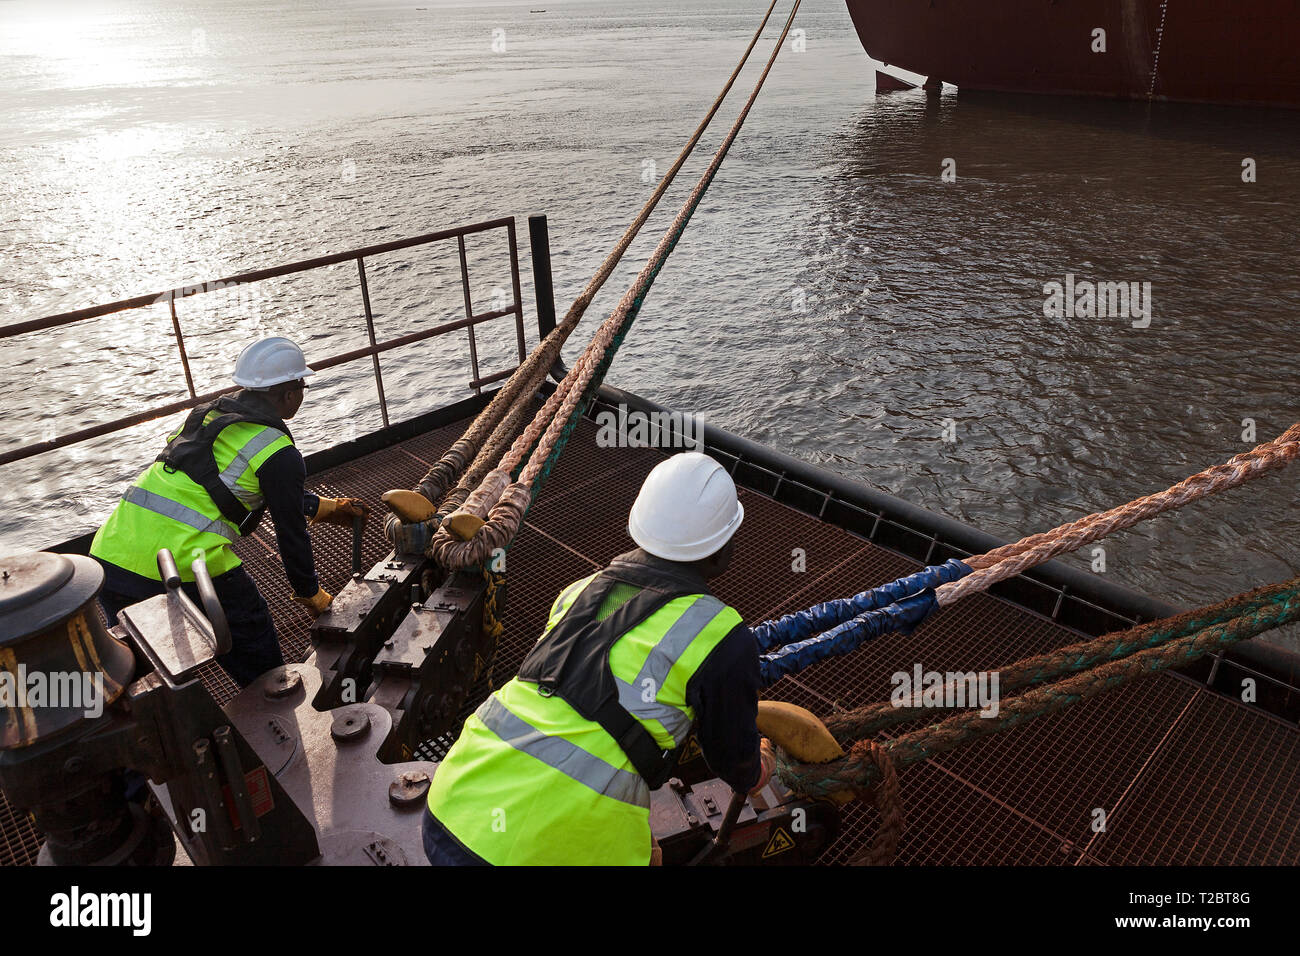 Port operations for managing and transporting iron ore. Dolphin jetty mooring facility with riggers using quick release rope hooks as ship sets sail Stock Photo